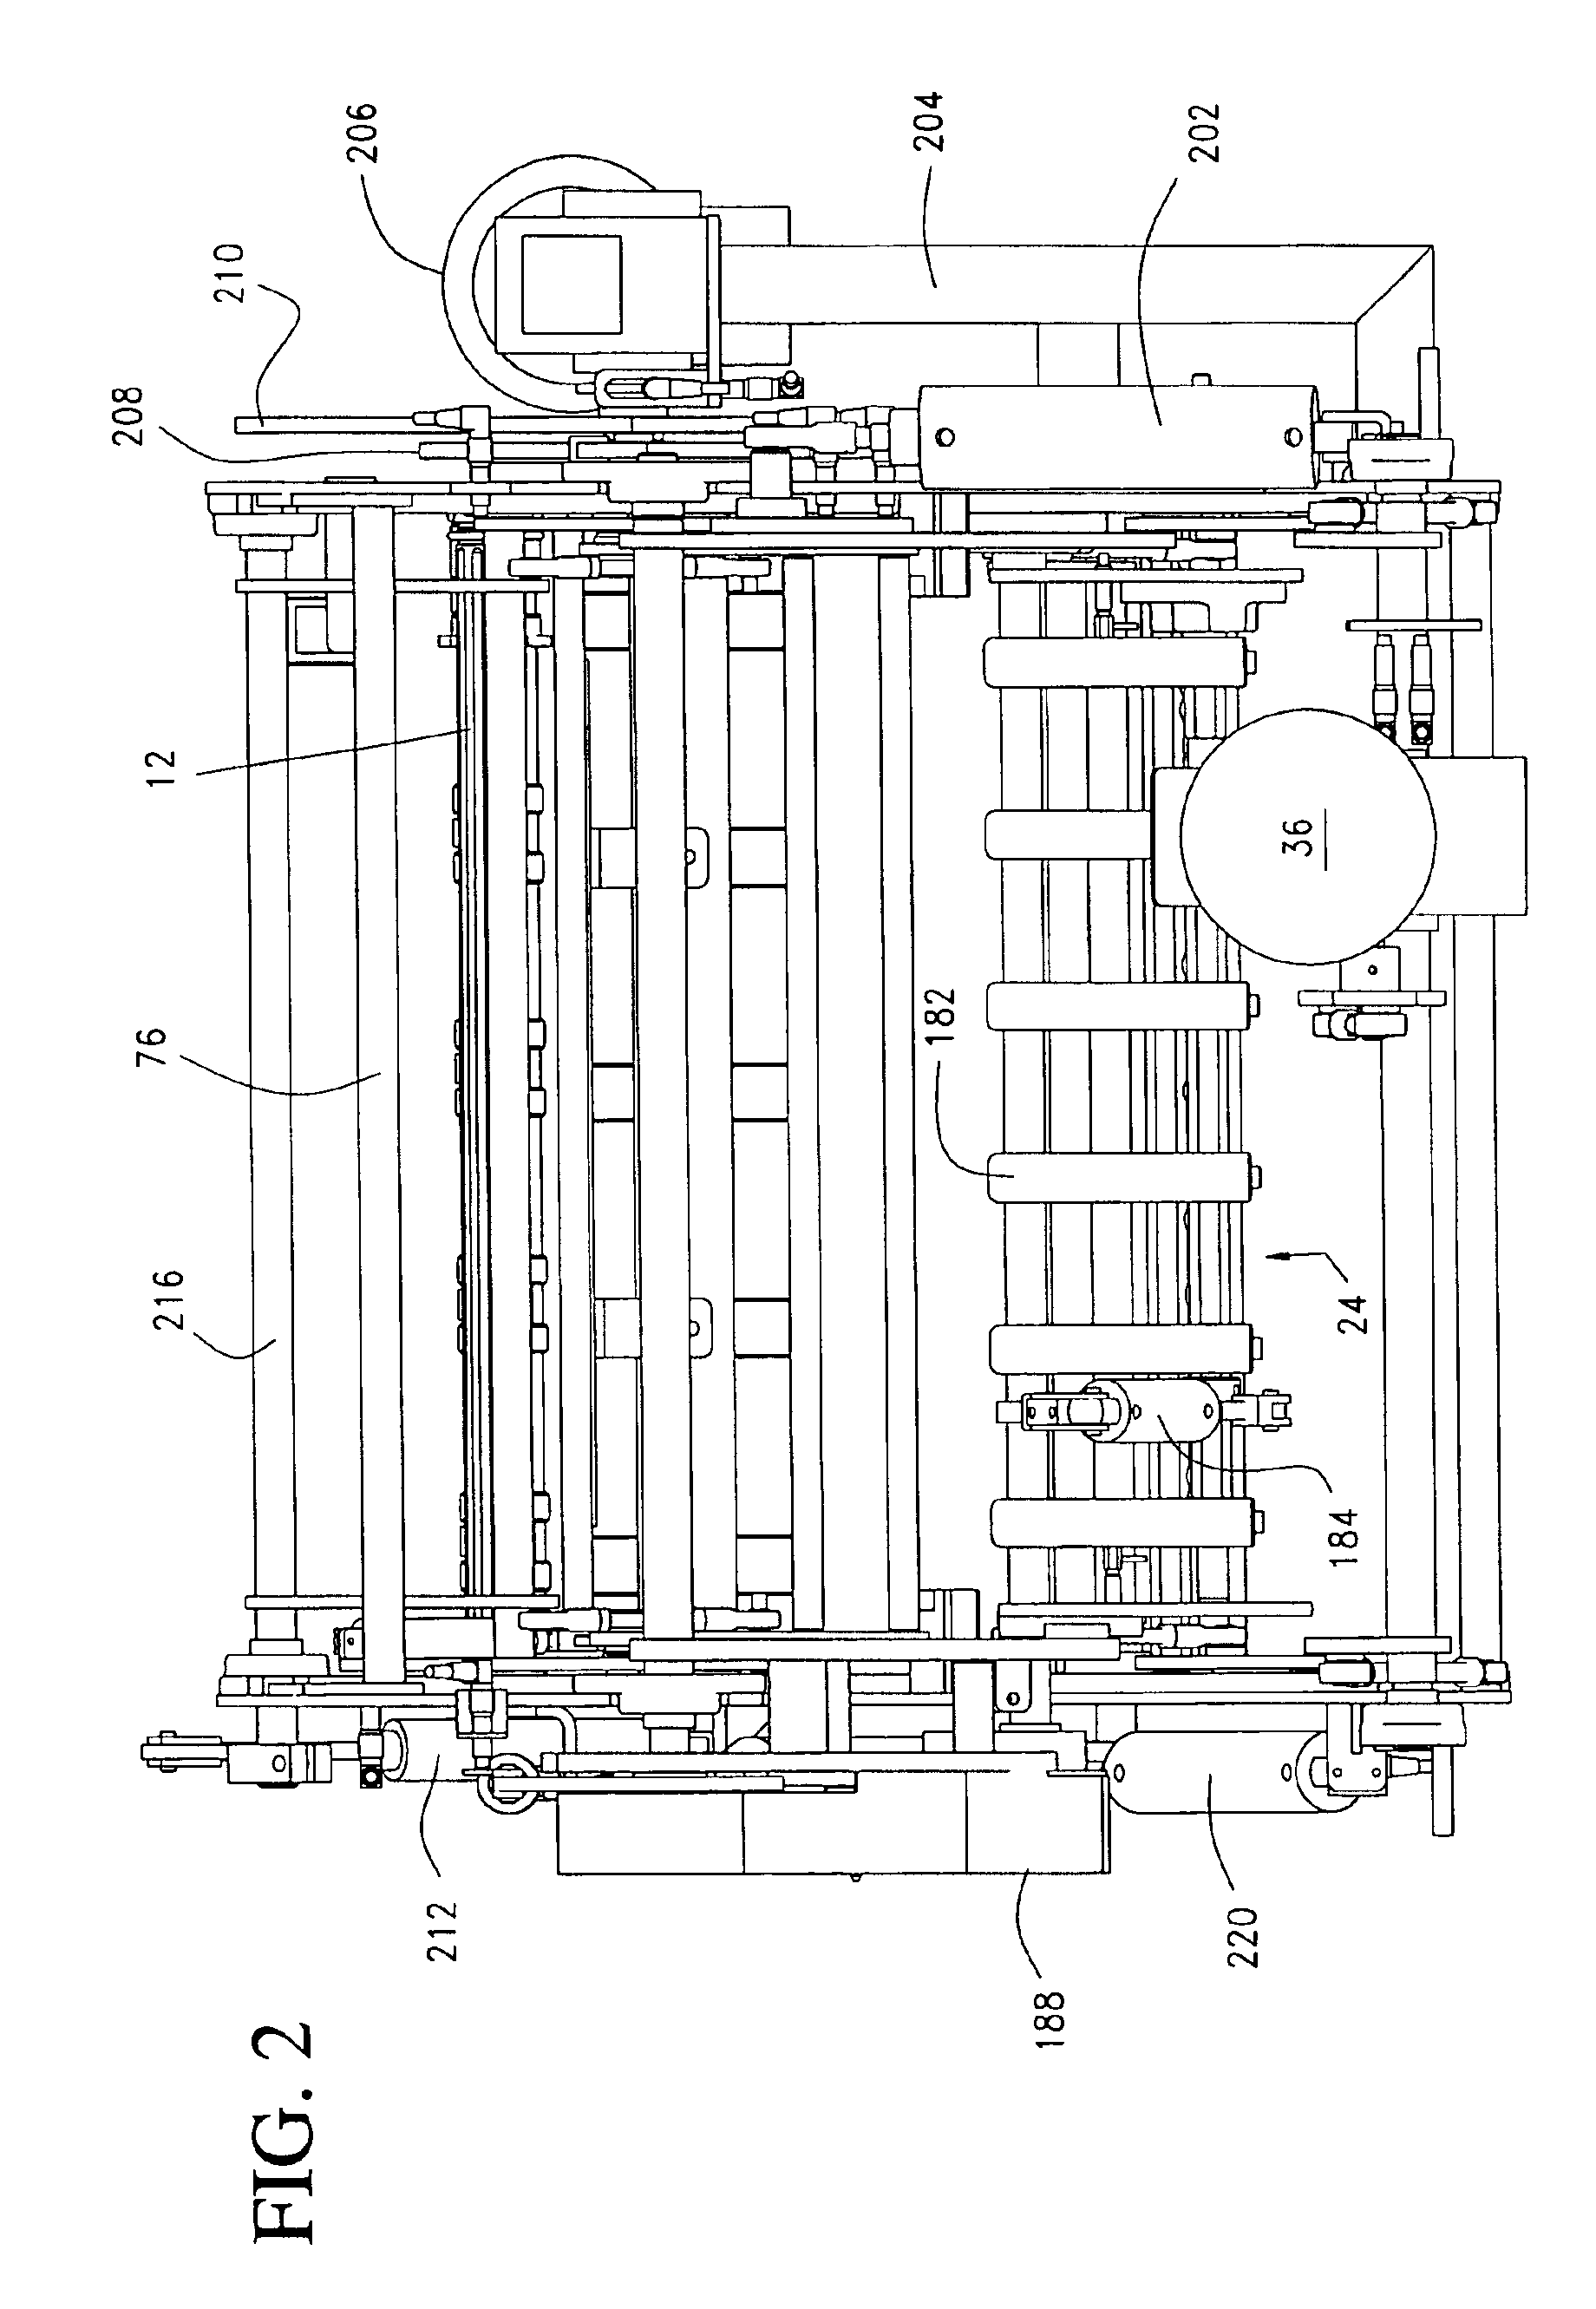 Method and apparatus for stacking discrete planar objects